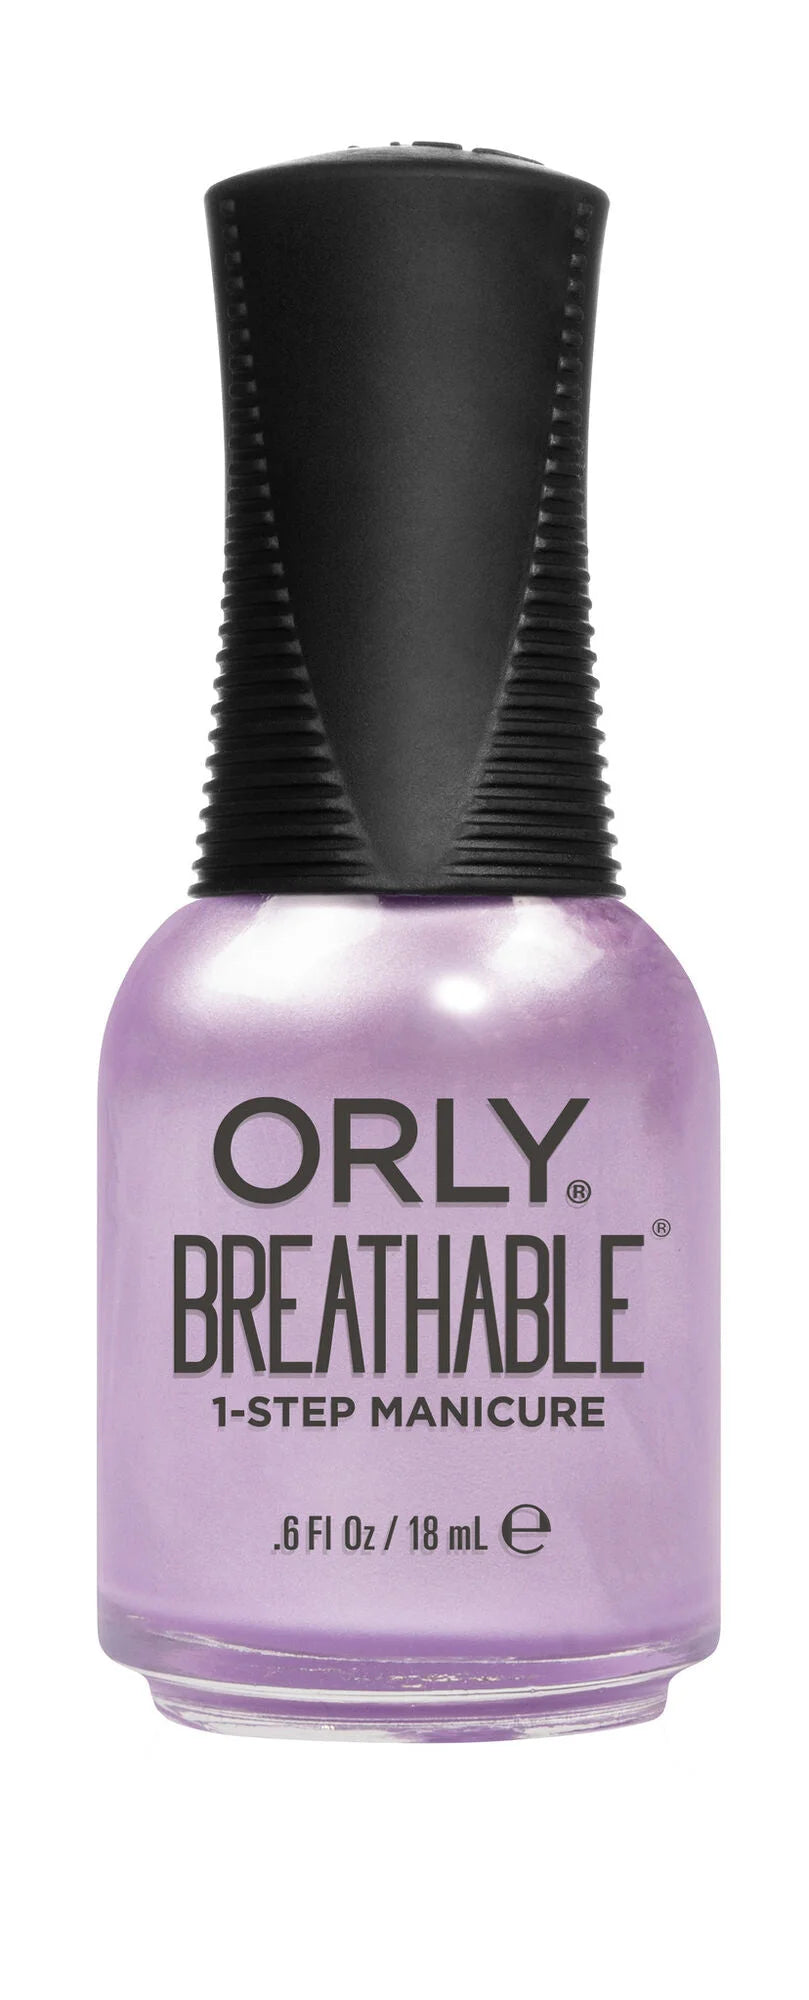 orly breathable nail polish, Just Squid-ing 2060047 Classique Nails Beauty Supply Inc.